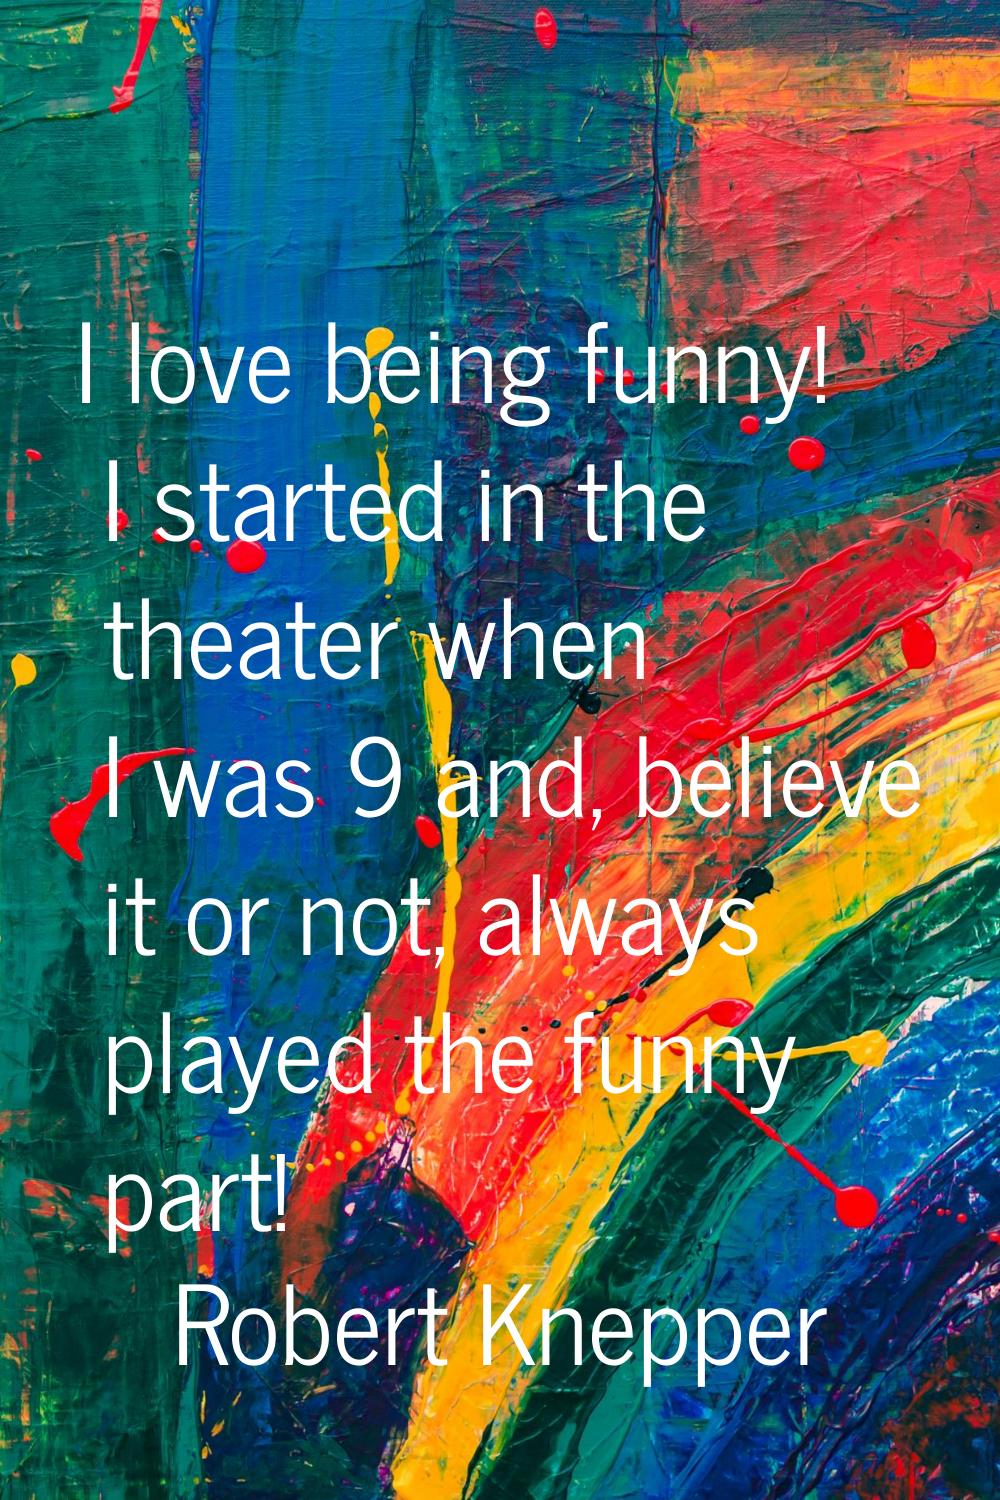 I love being funny! I started in the theater when I was 9 and, believe it or not, always played the